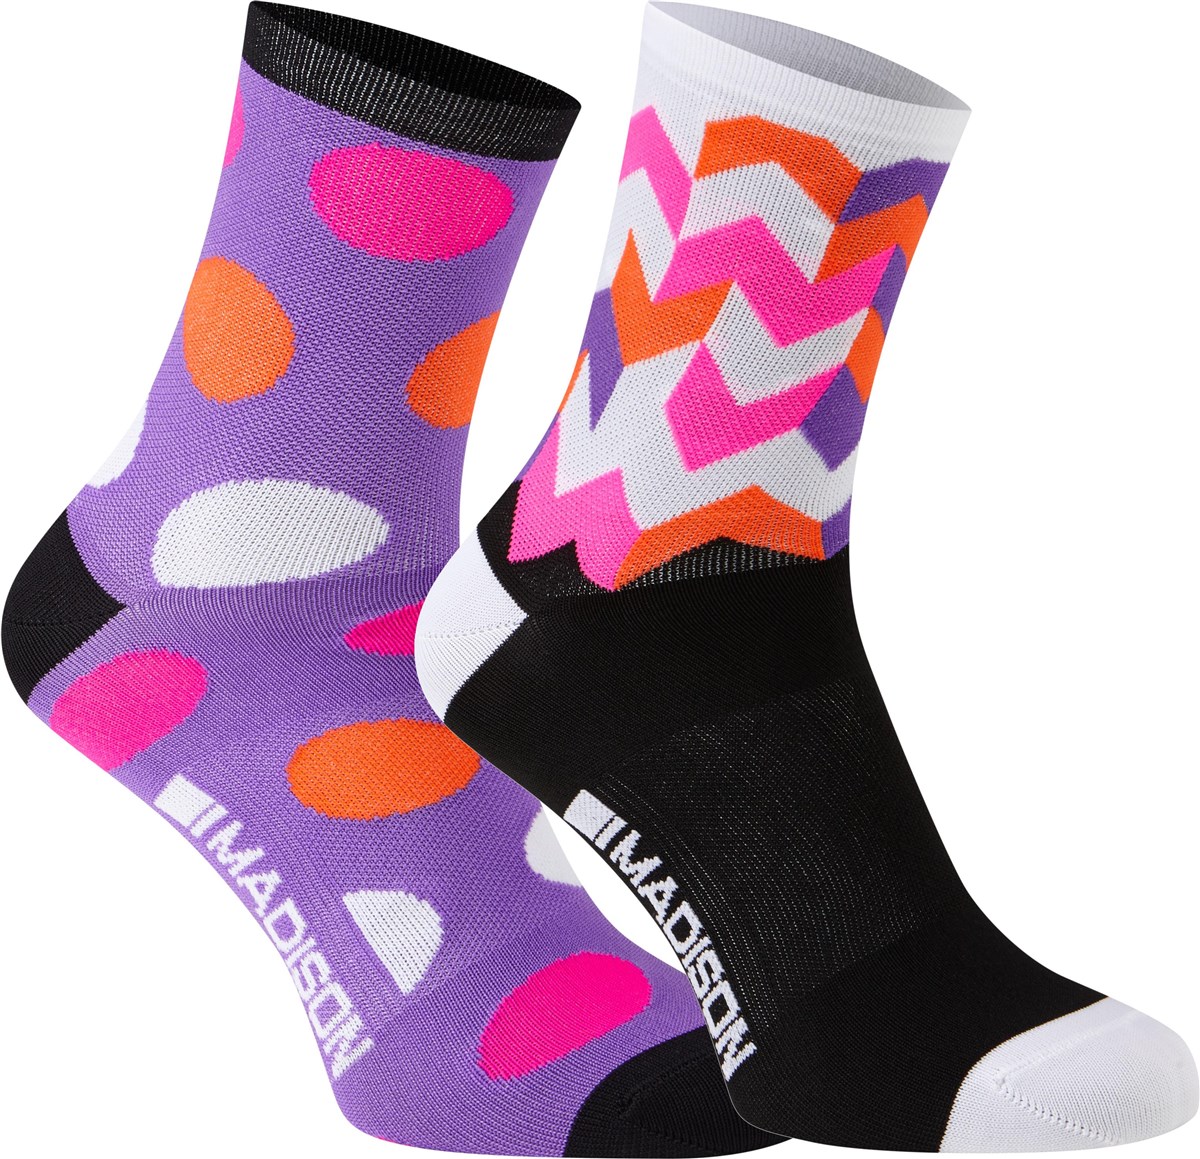 Madison Sportive Womens Mid Socks - Pack of 2 product image